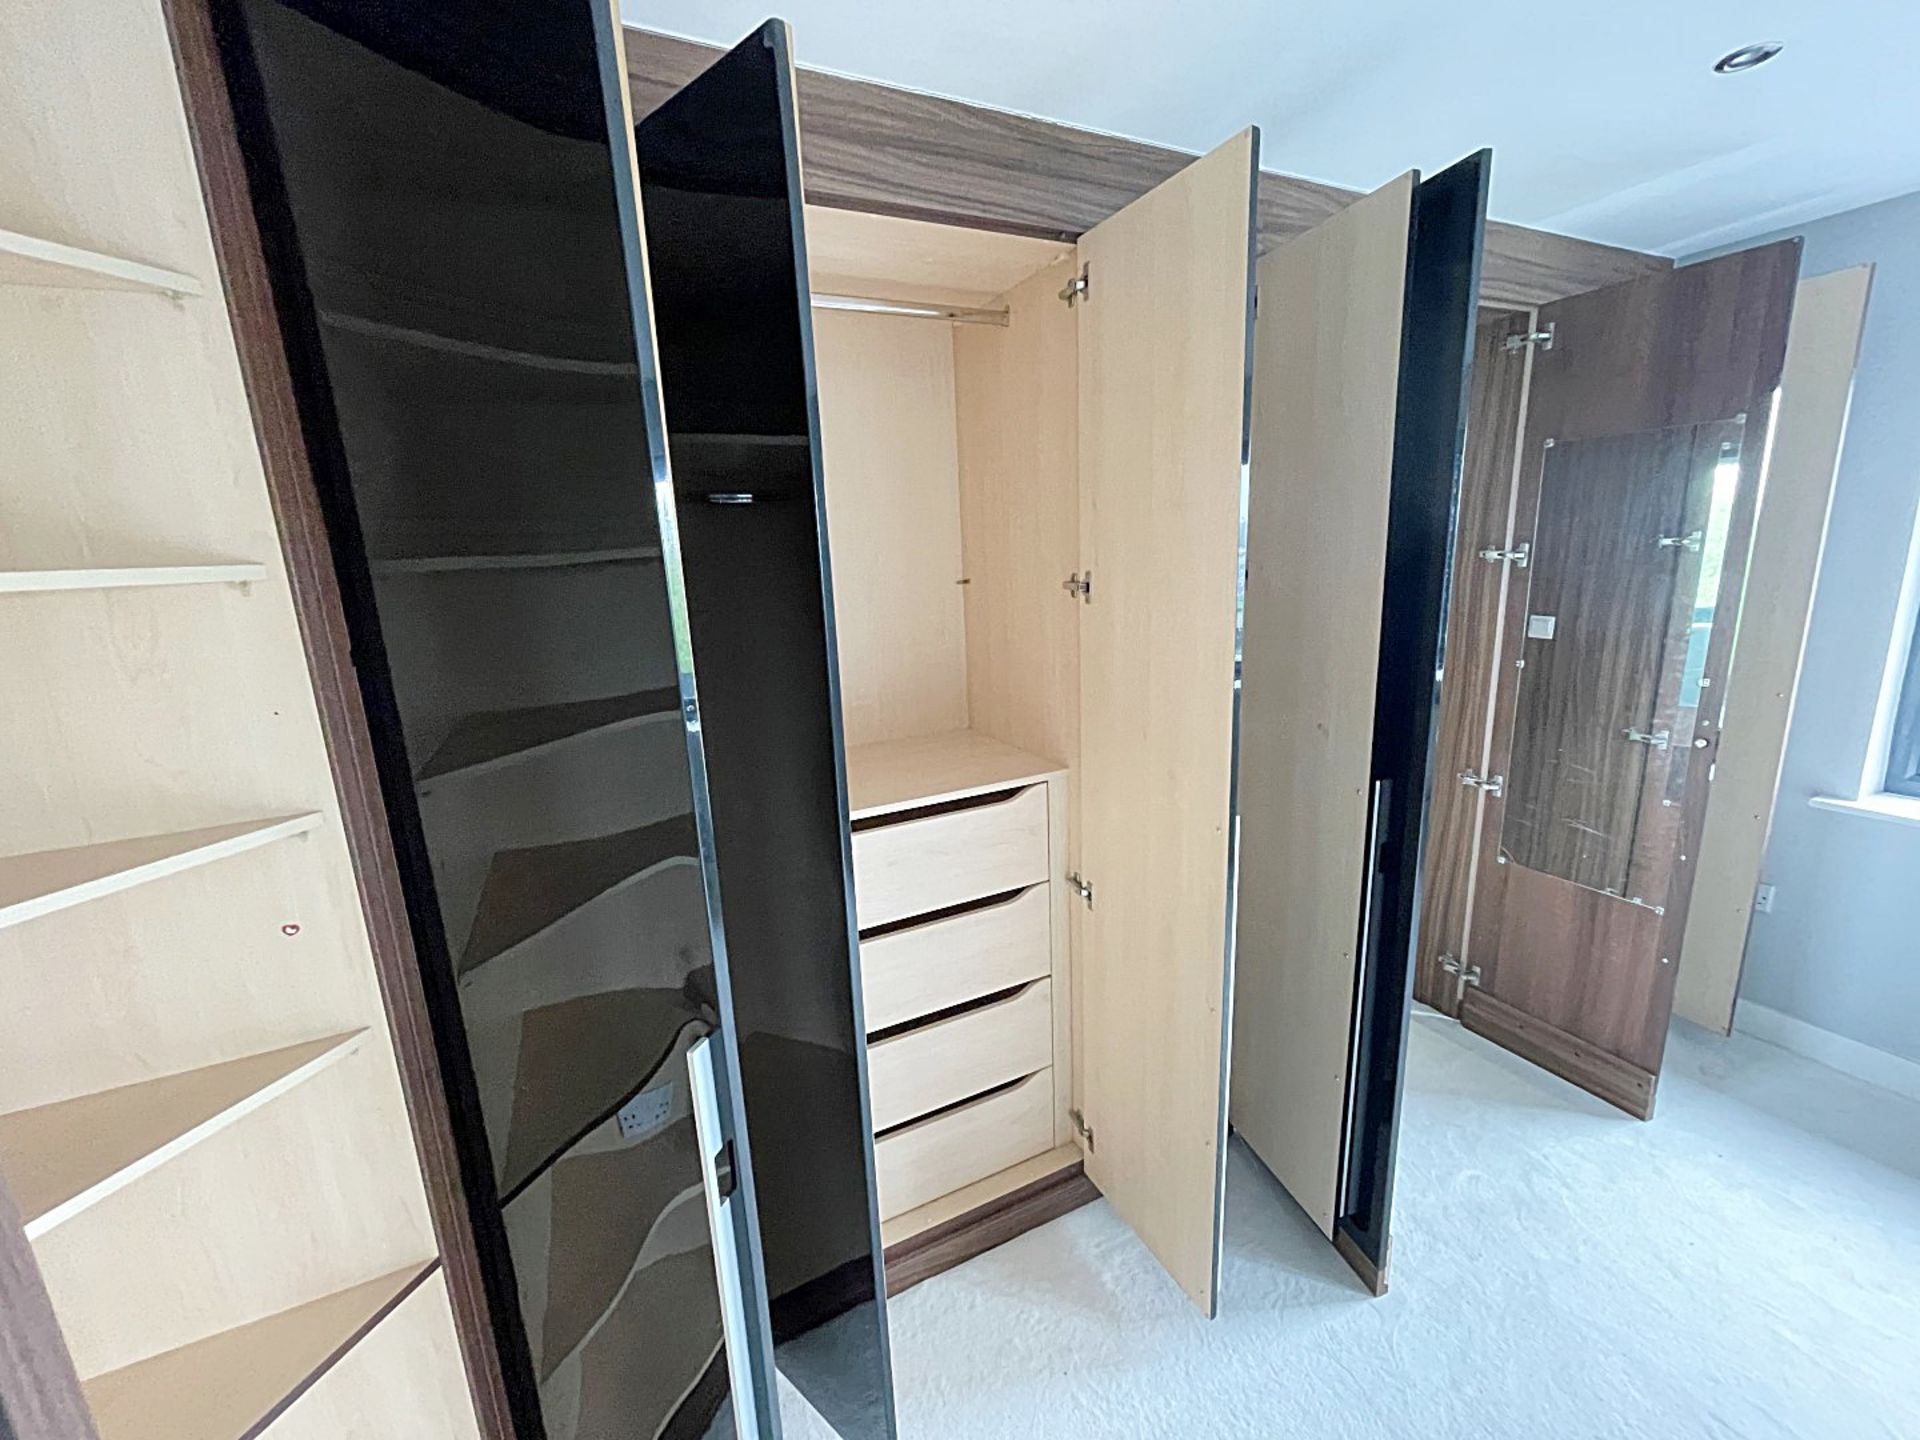 Bank Of Premium Bespoke Fitted Wardrobes With Black Glass Door Frontage - Approx. 4-Metres In Length - Image 9 of 18